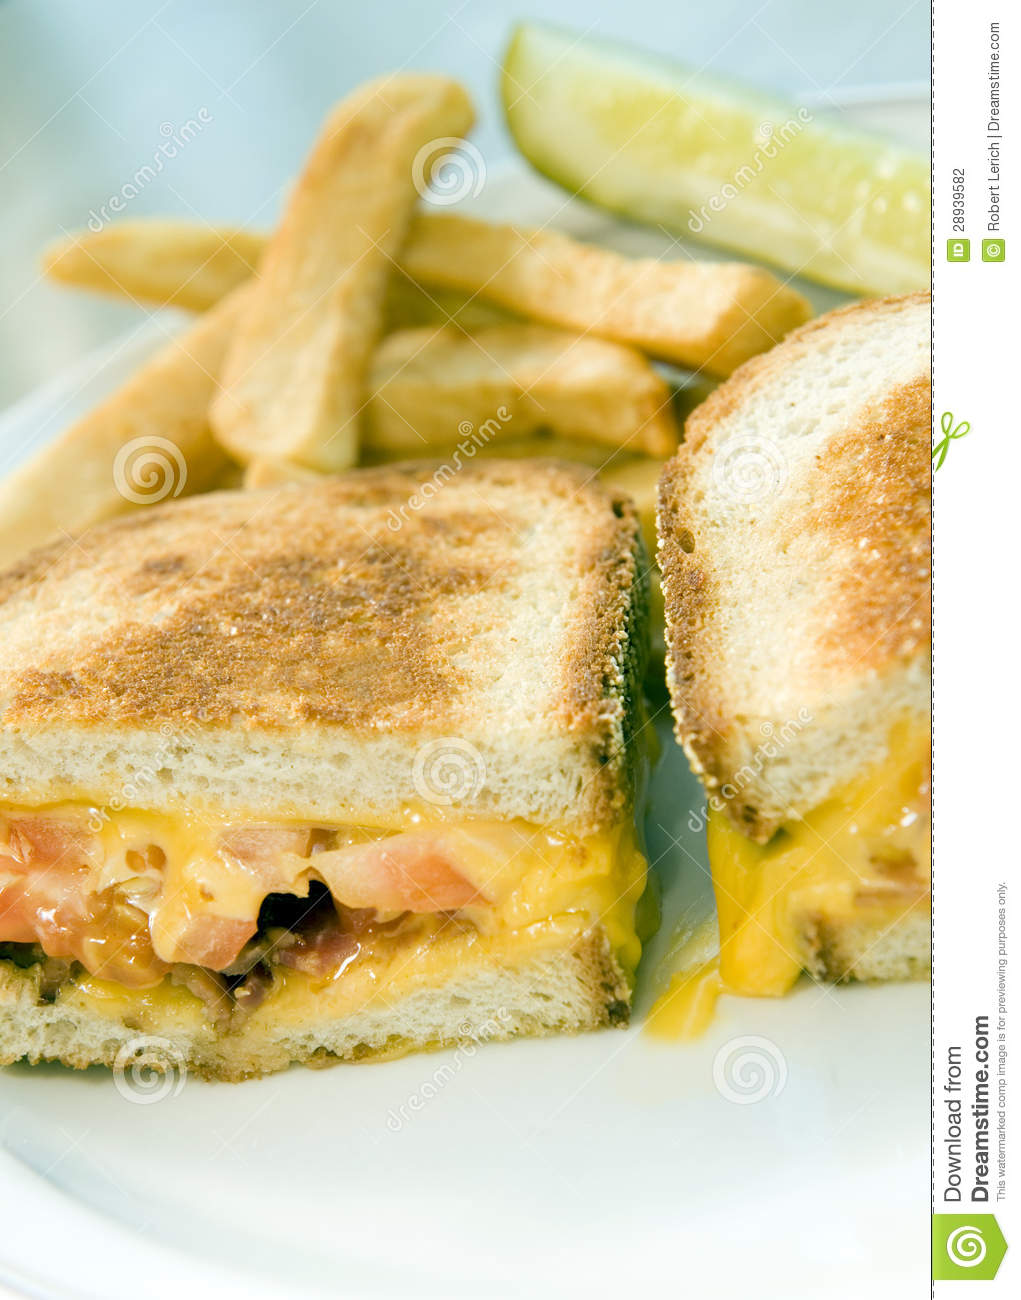 Grilled Cheese Sandwich Bacon Tomato With French Fries Potatoes Stock